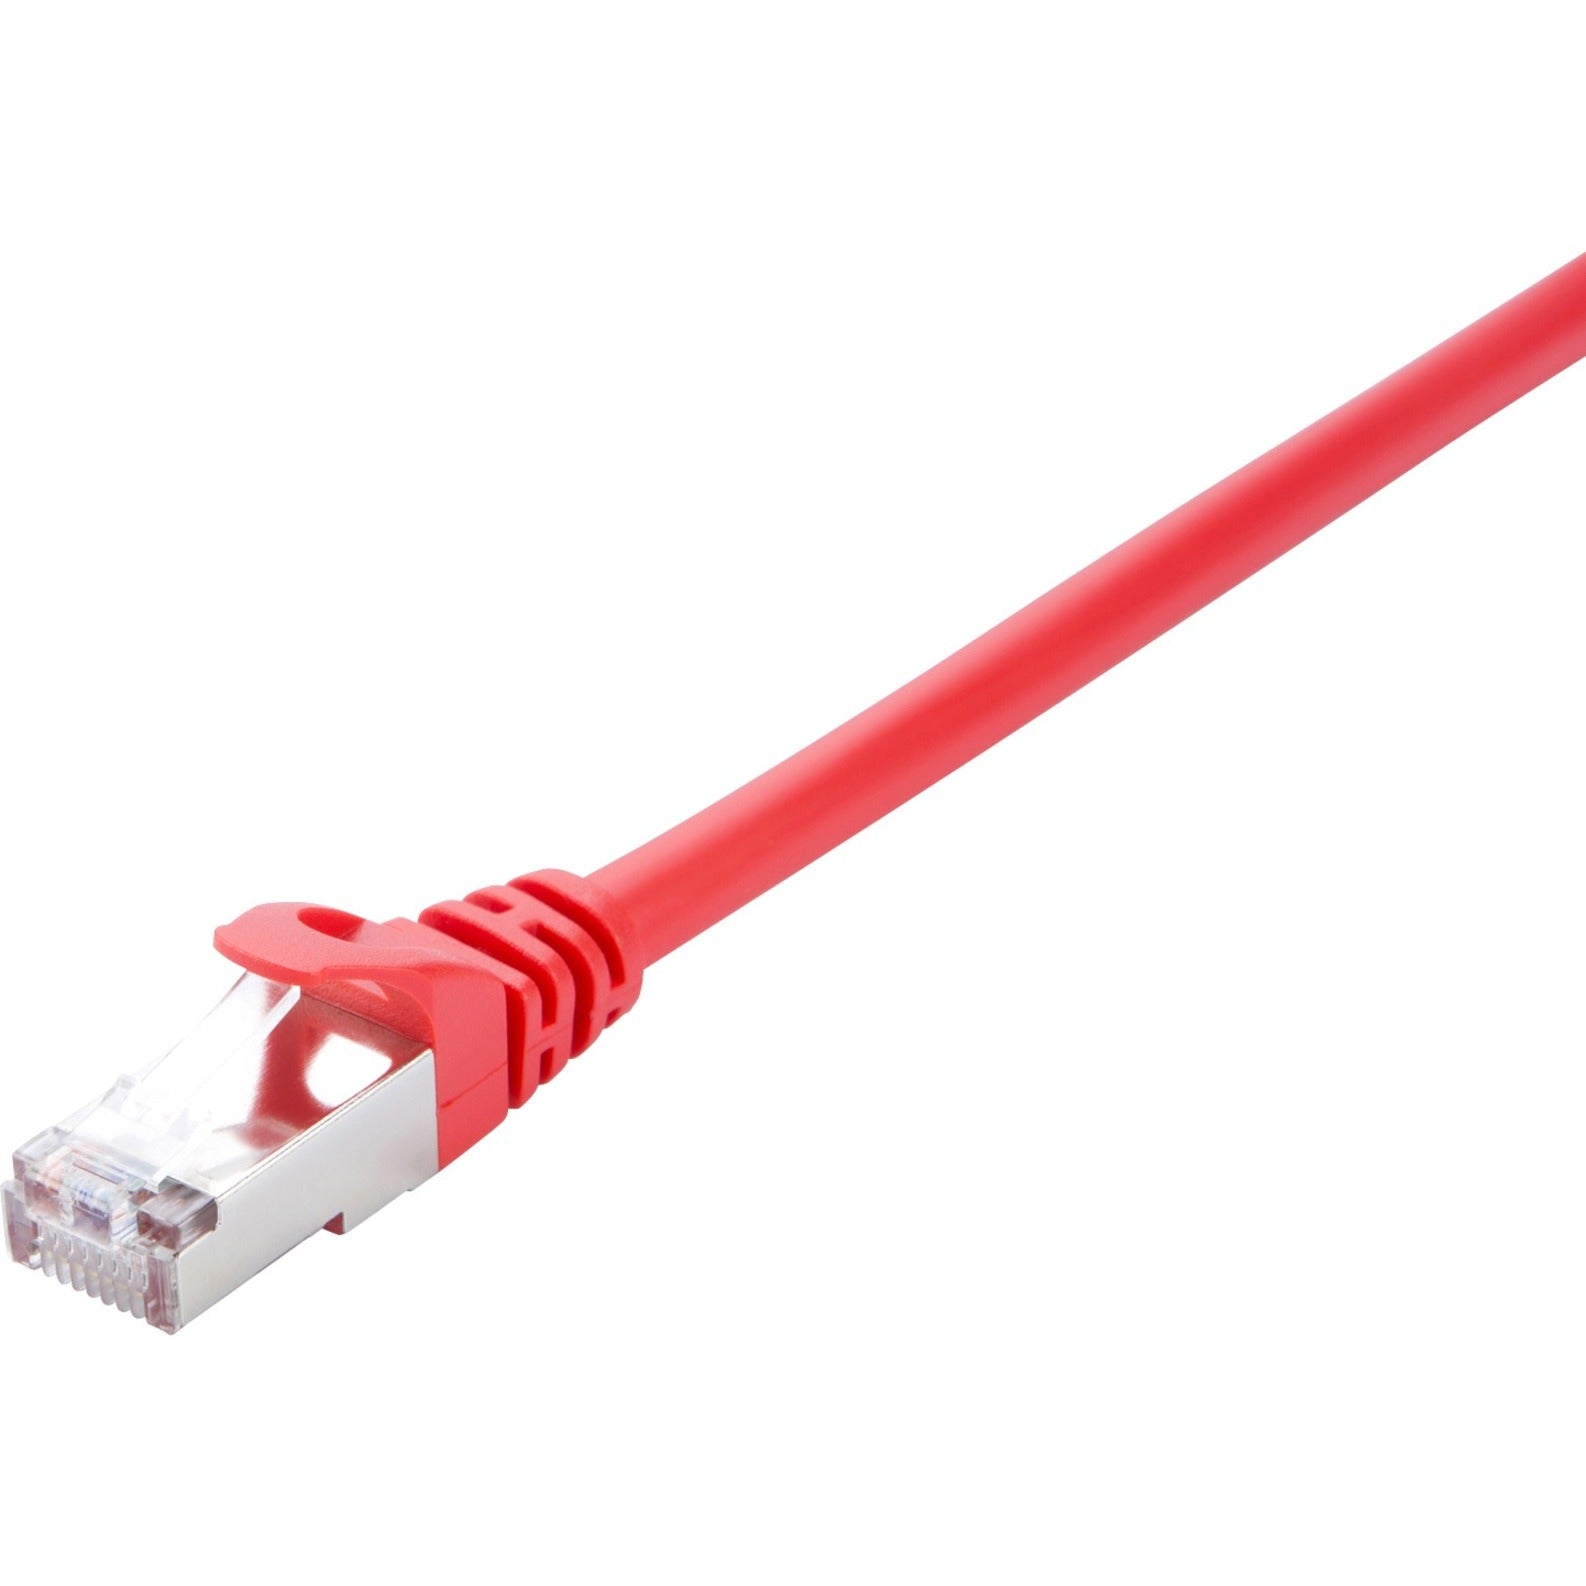 V7 V7CAT5STP-02M-RED-1N Red Cat5e Shielded (STP) Cable RJ45 Male to RJ45 Male 2m 6.6ft, Molded, Snagless, Noise Reducing